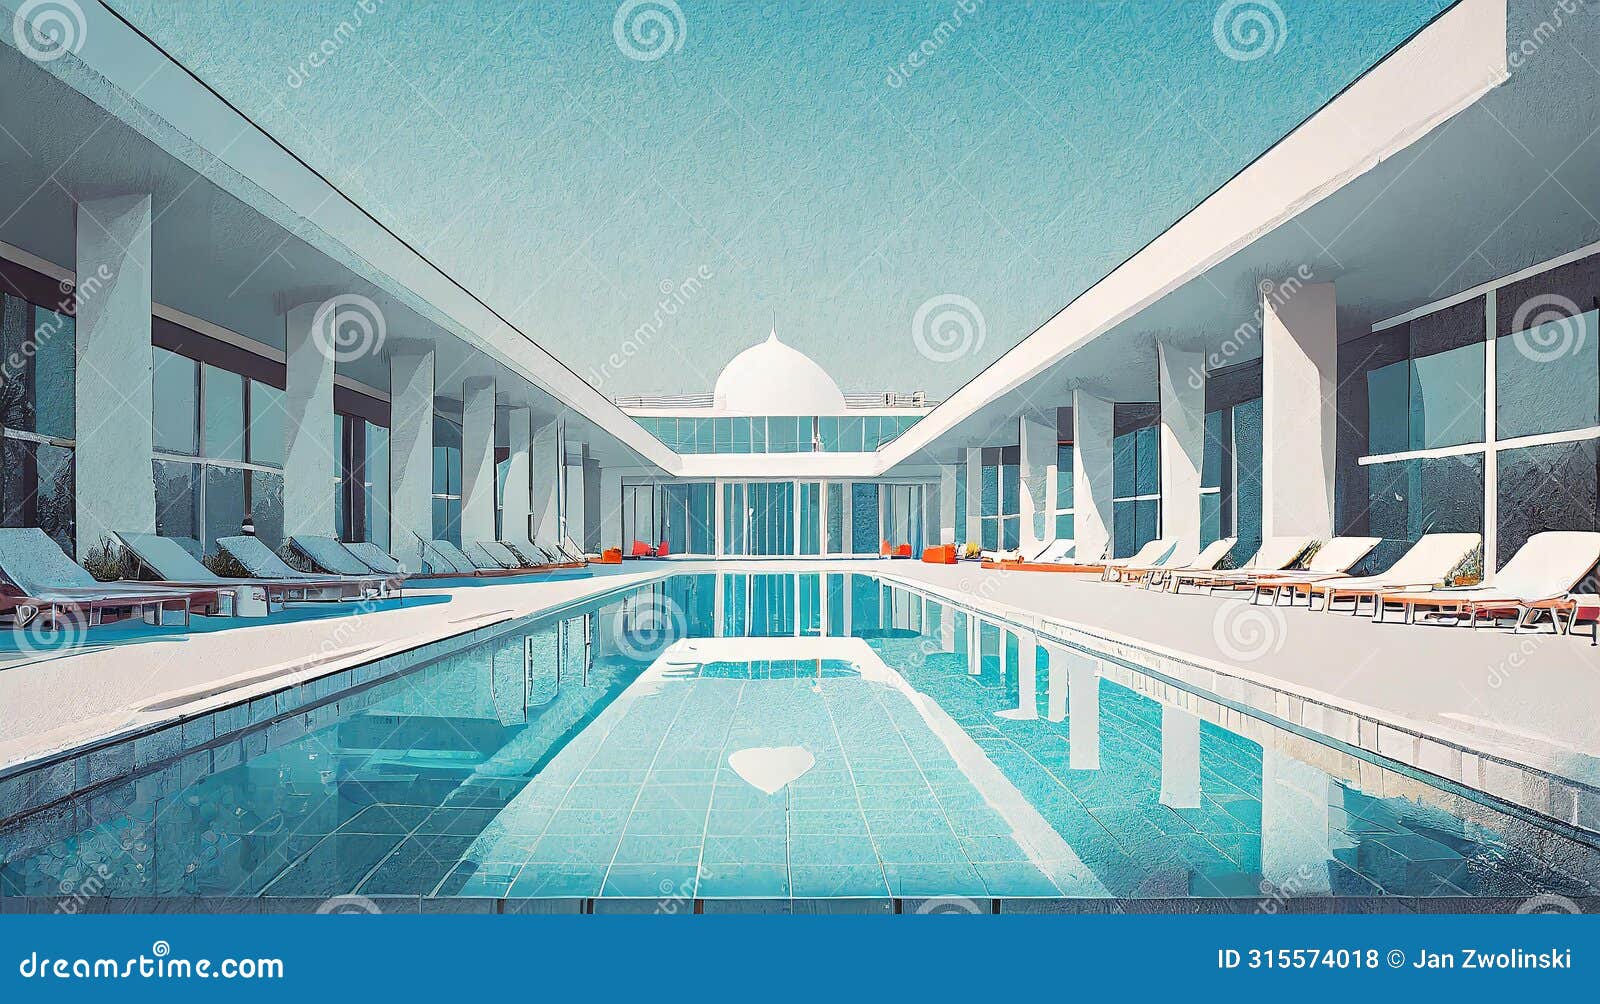 empty modernist swimming pool with lawn chairs